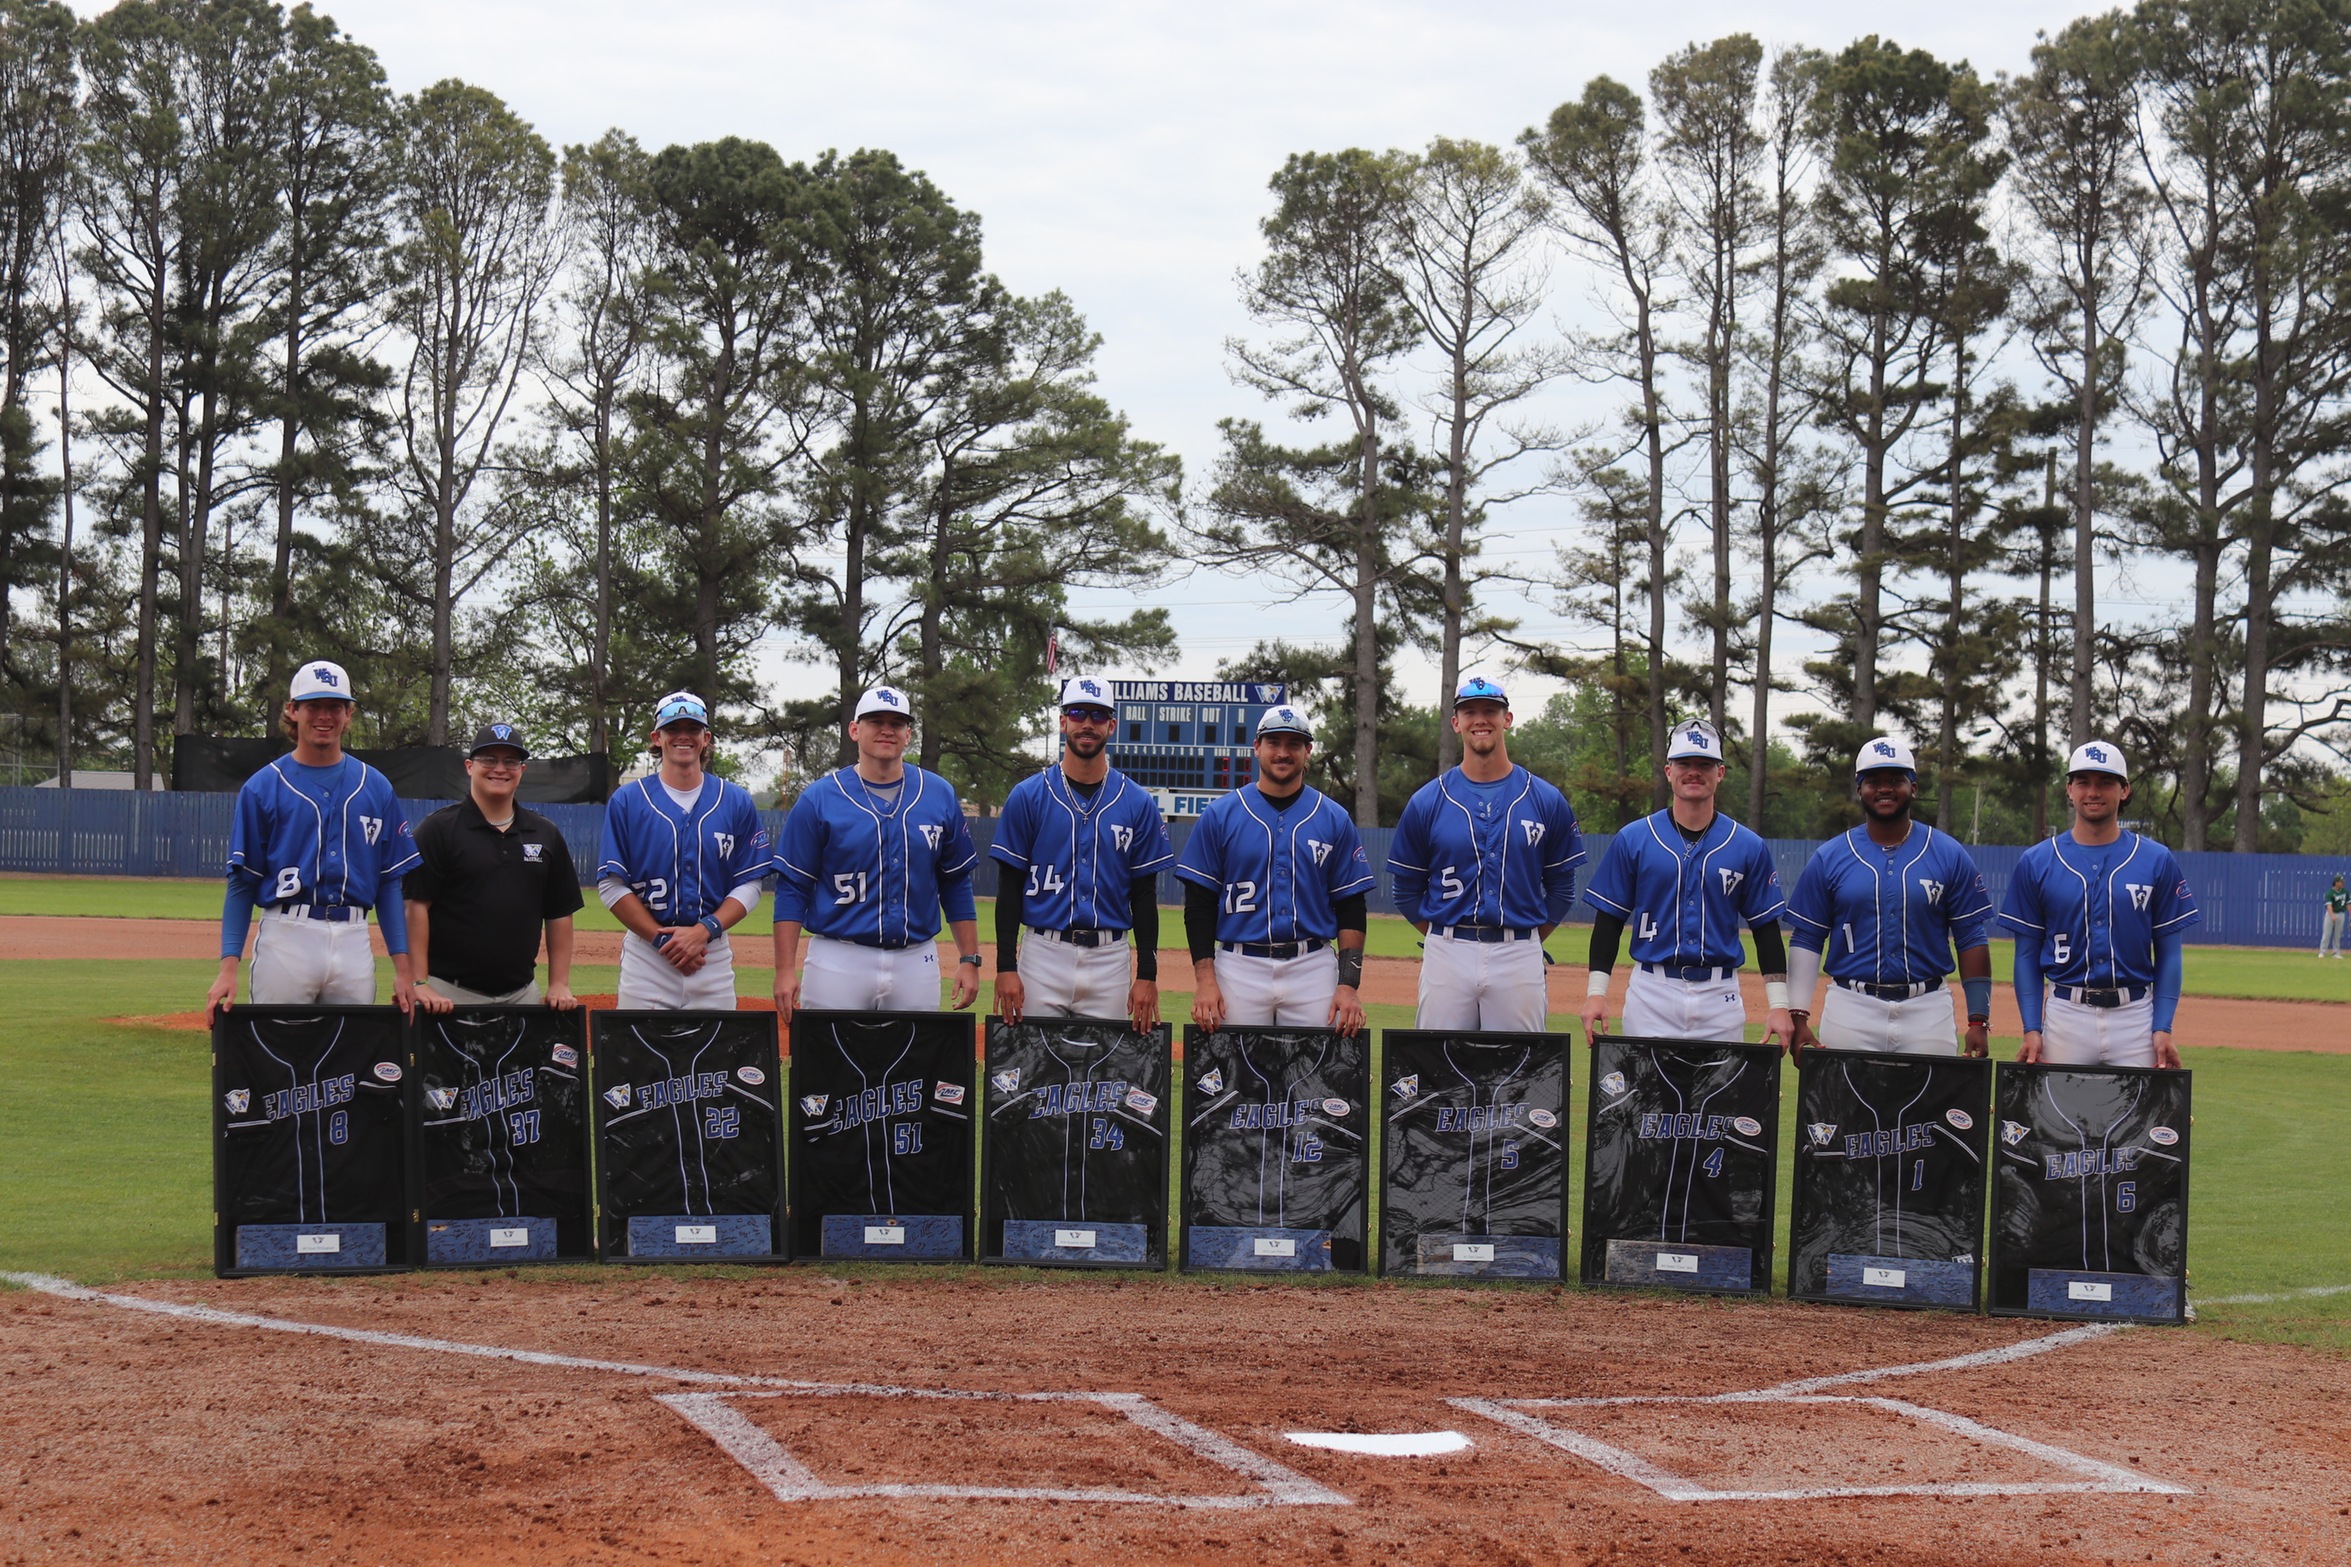 Offense Powers Eagles to Big Win on Senior Day